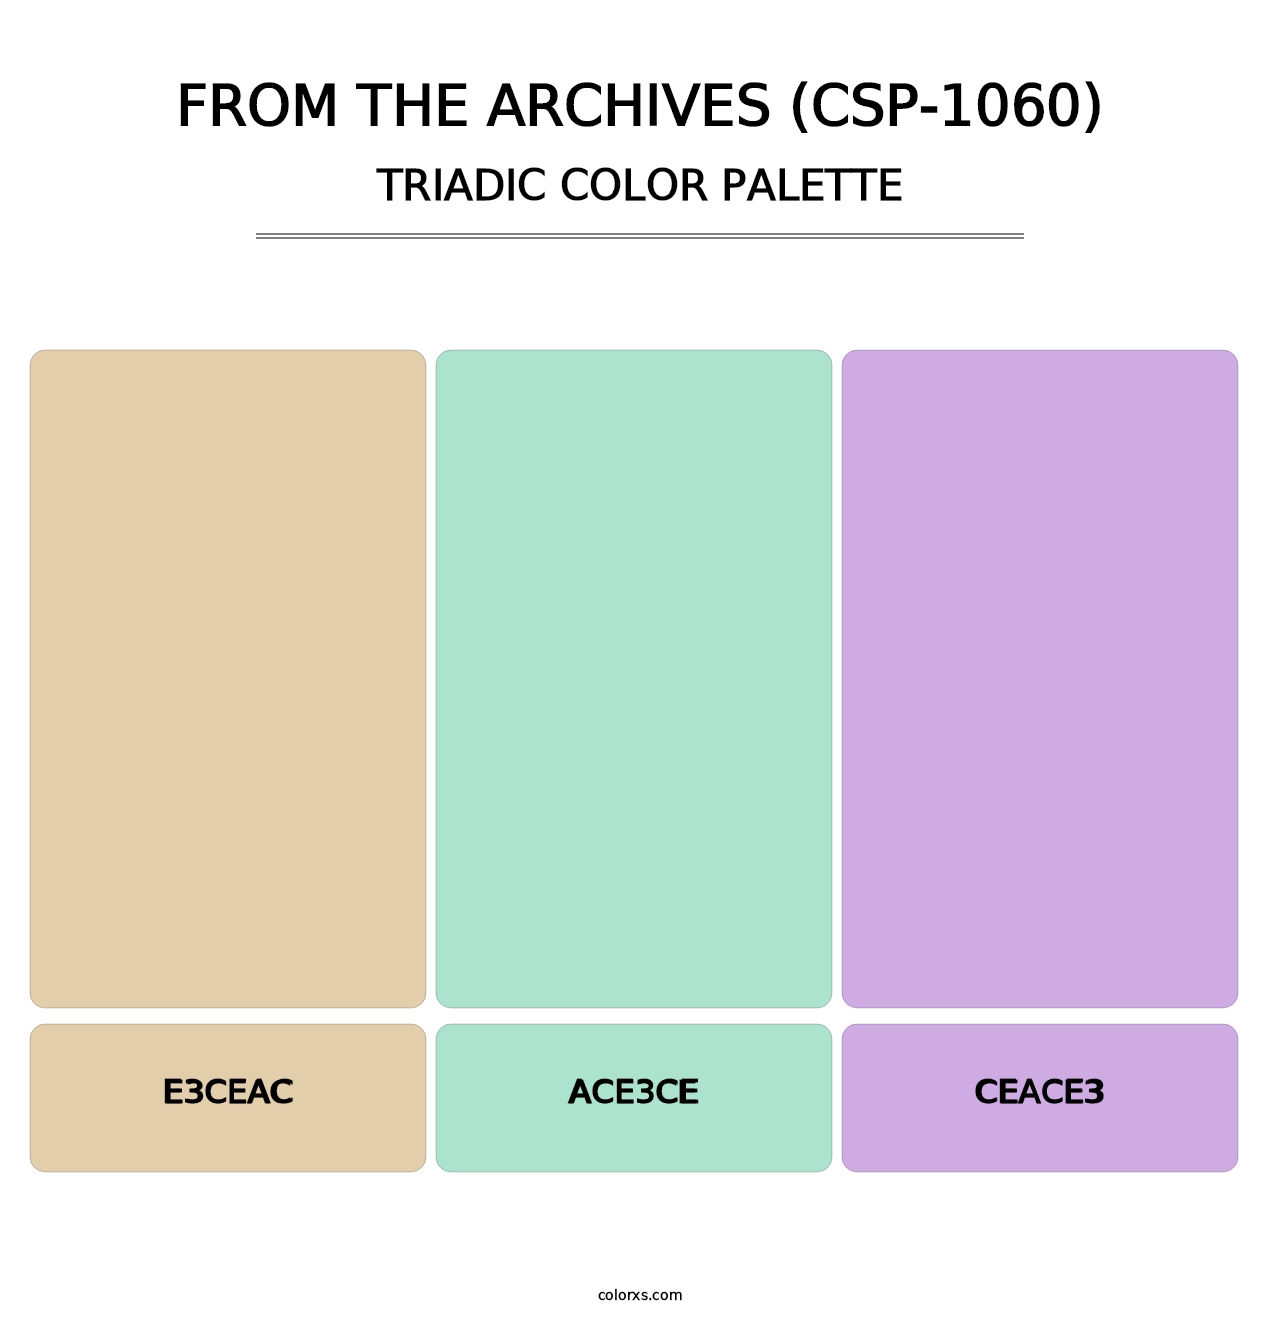 From the Archives (CSP-1060) - Triadic Color Palette